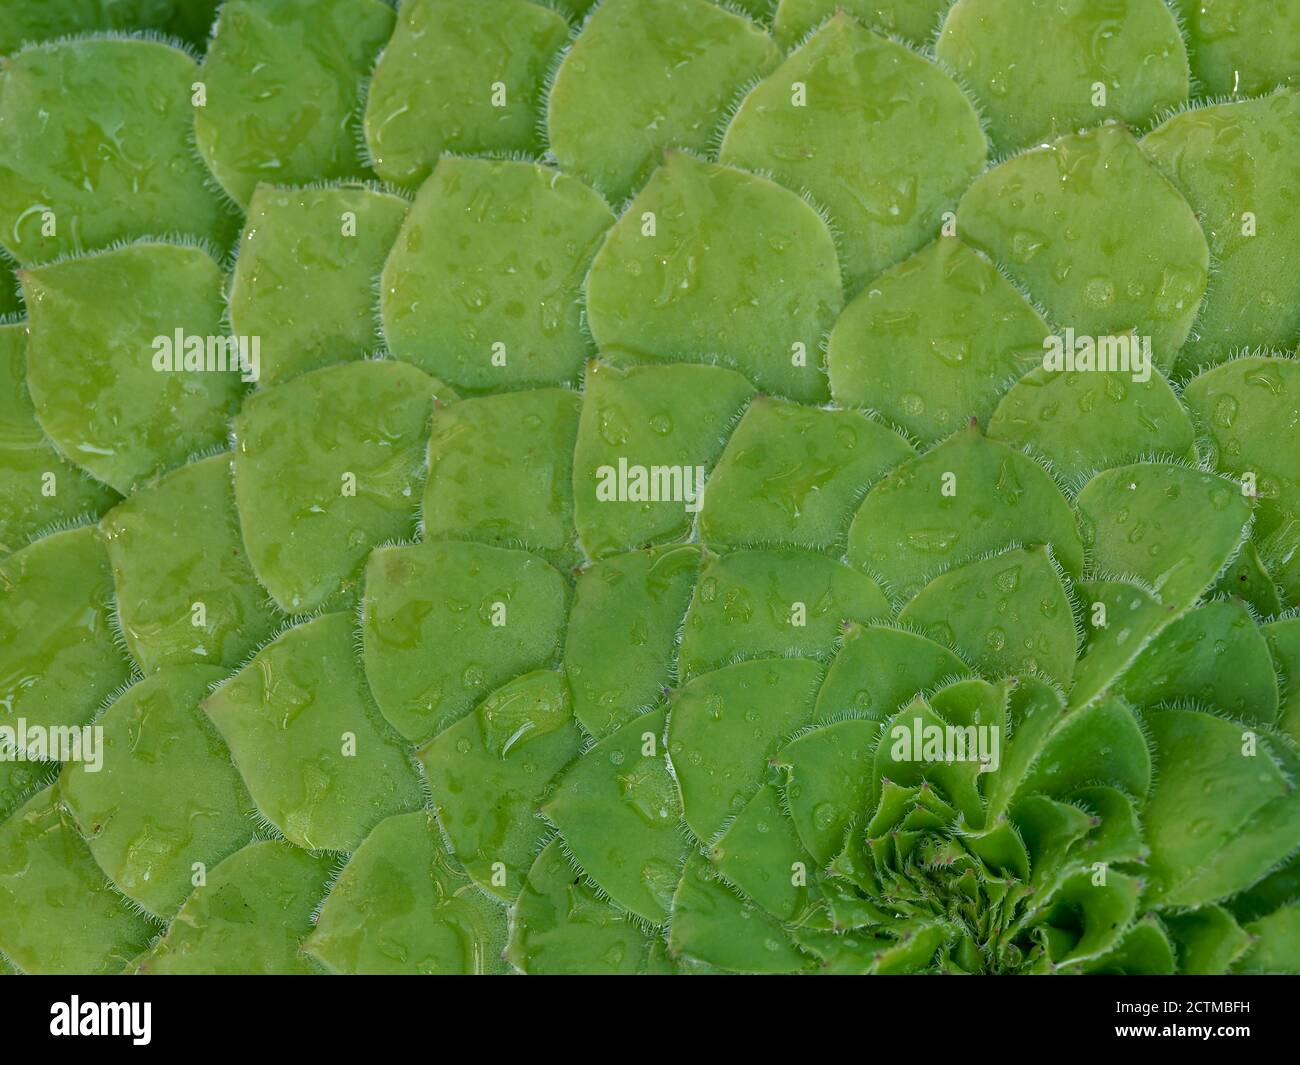 Closeup of the pattern formed by the overlapping green leaves of the succulent plant Aeonium tabuliforme with water droplets Stock Photo